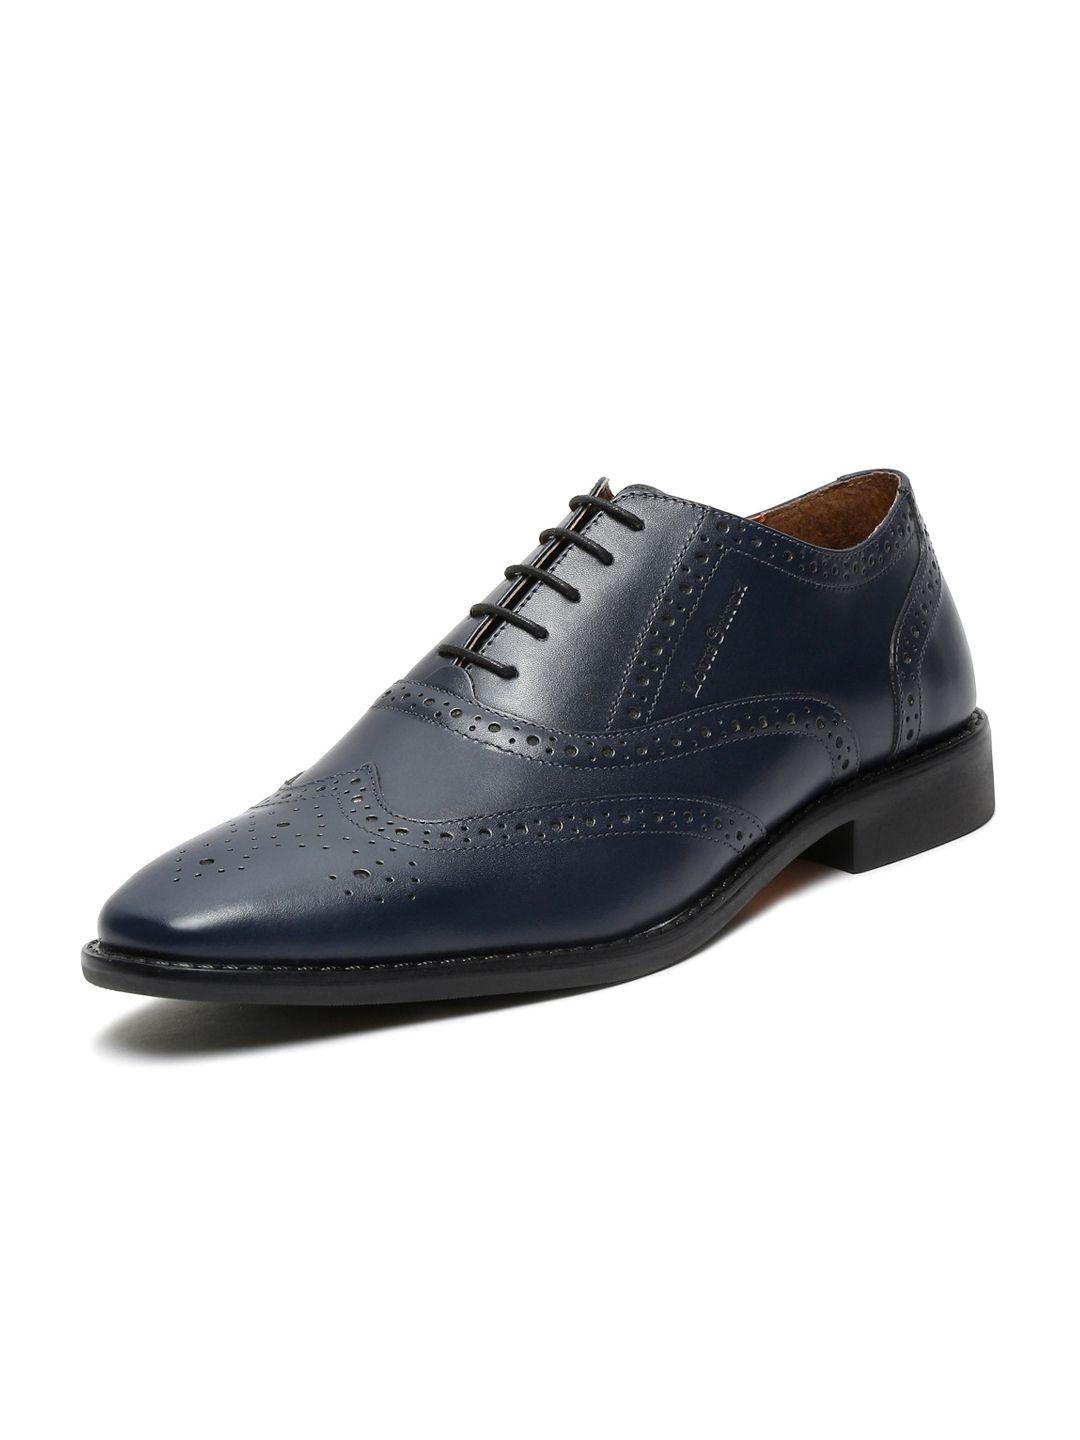 LOUIS STITCH Men Textured Leather Formal Brogues